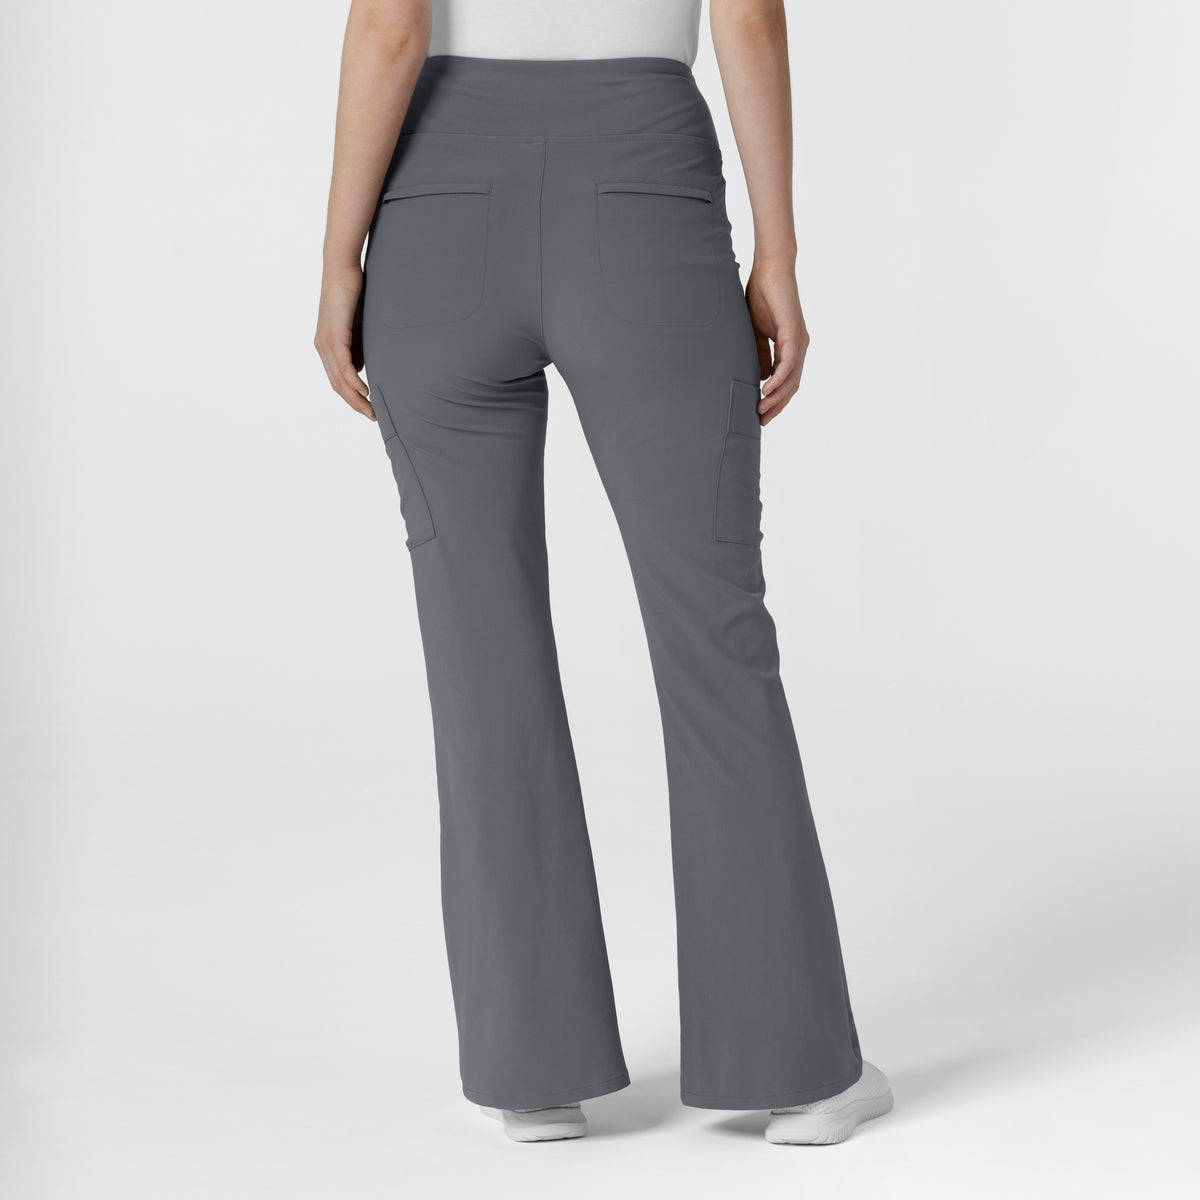 RENEW Women's Front Slit Flare Scrub Pant Pewter back view